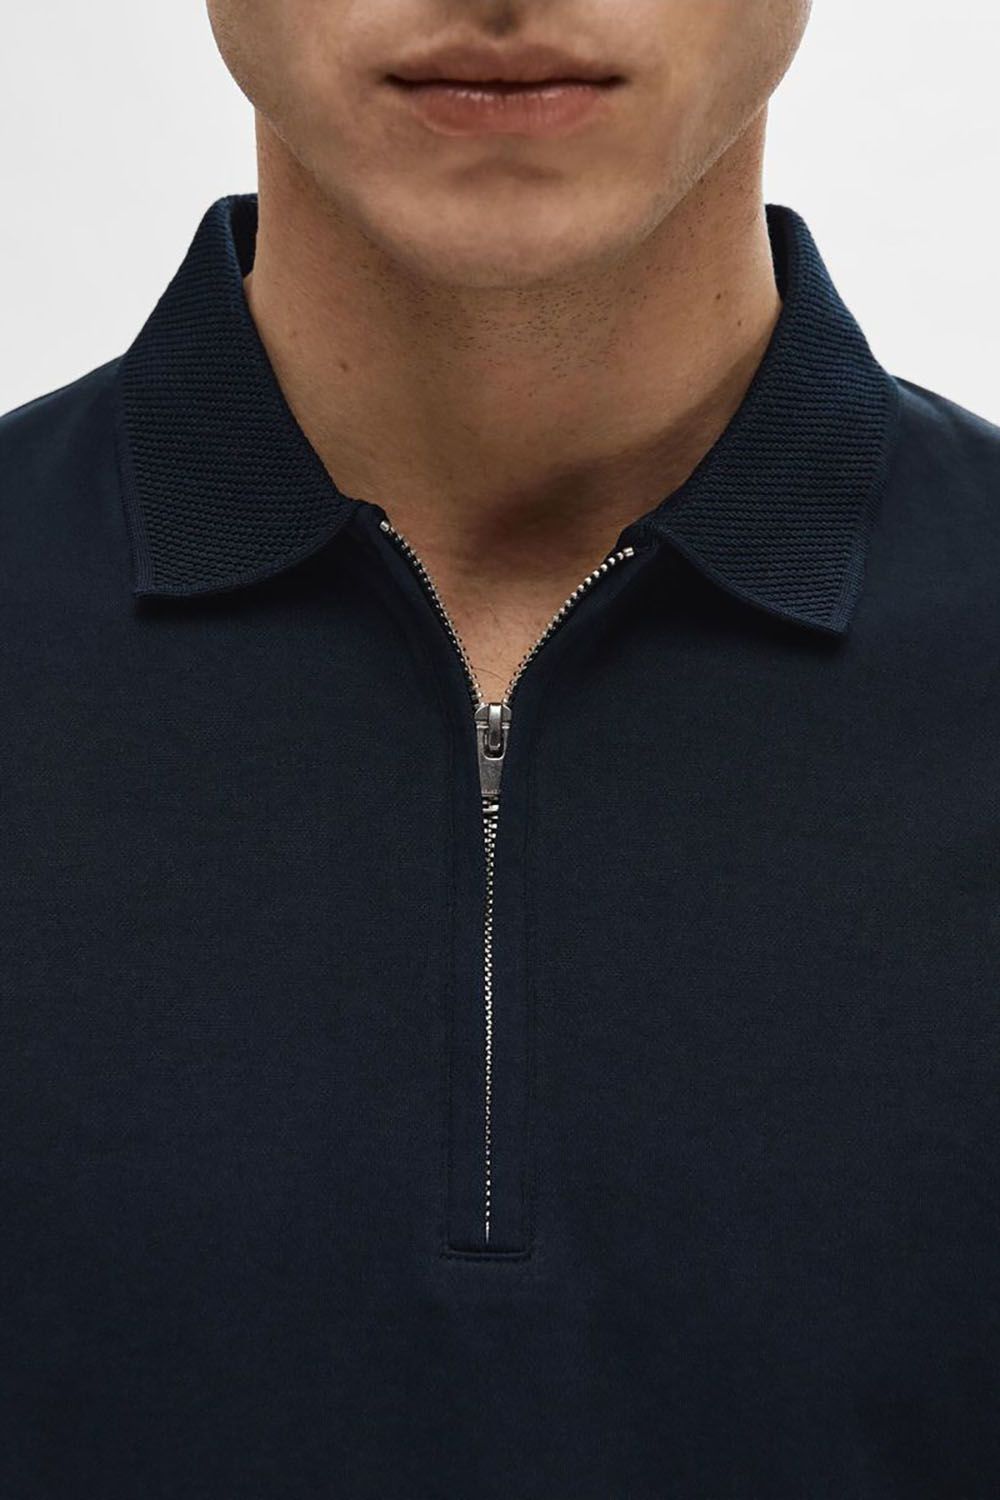 Selected Homme Polo Fave Donkerblauw 